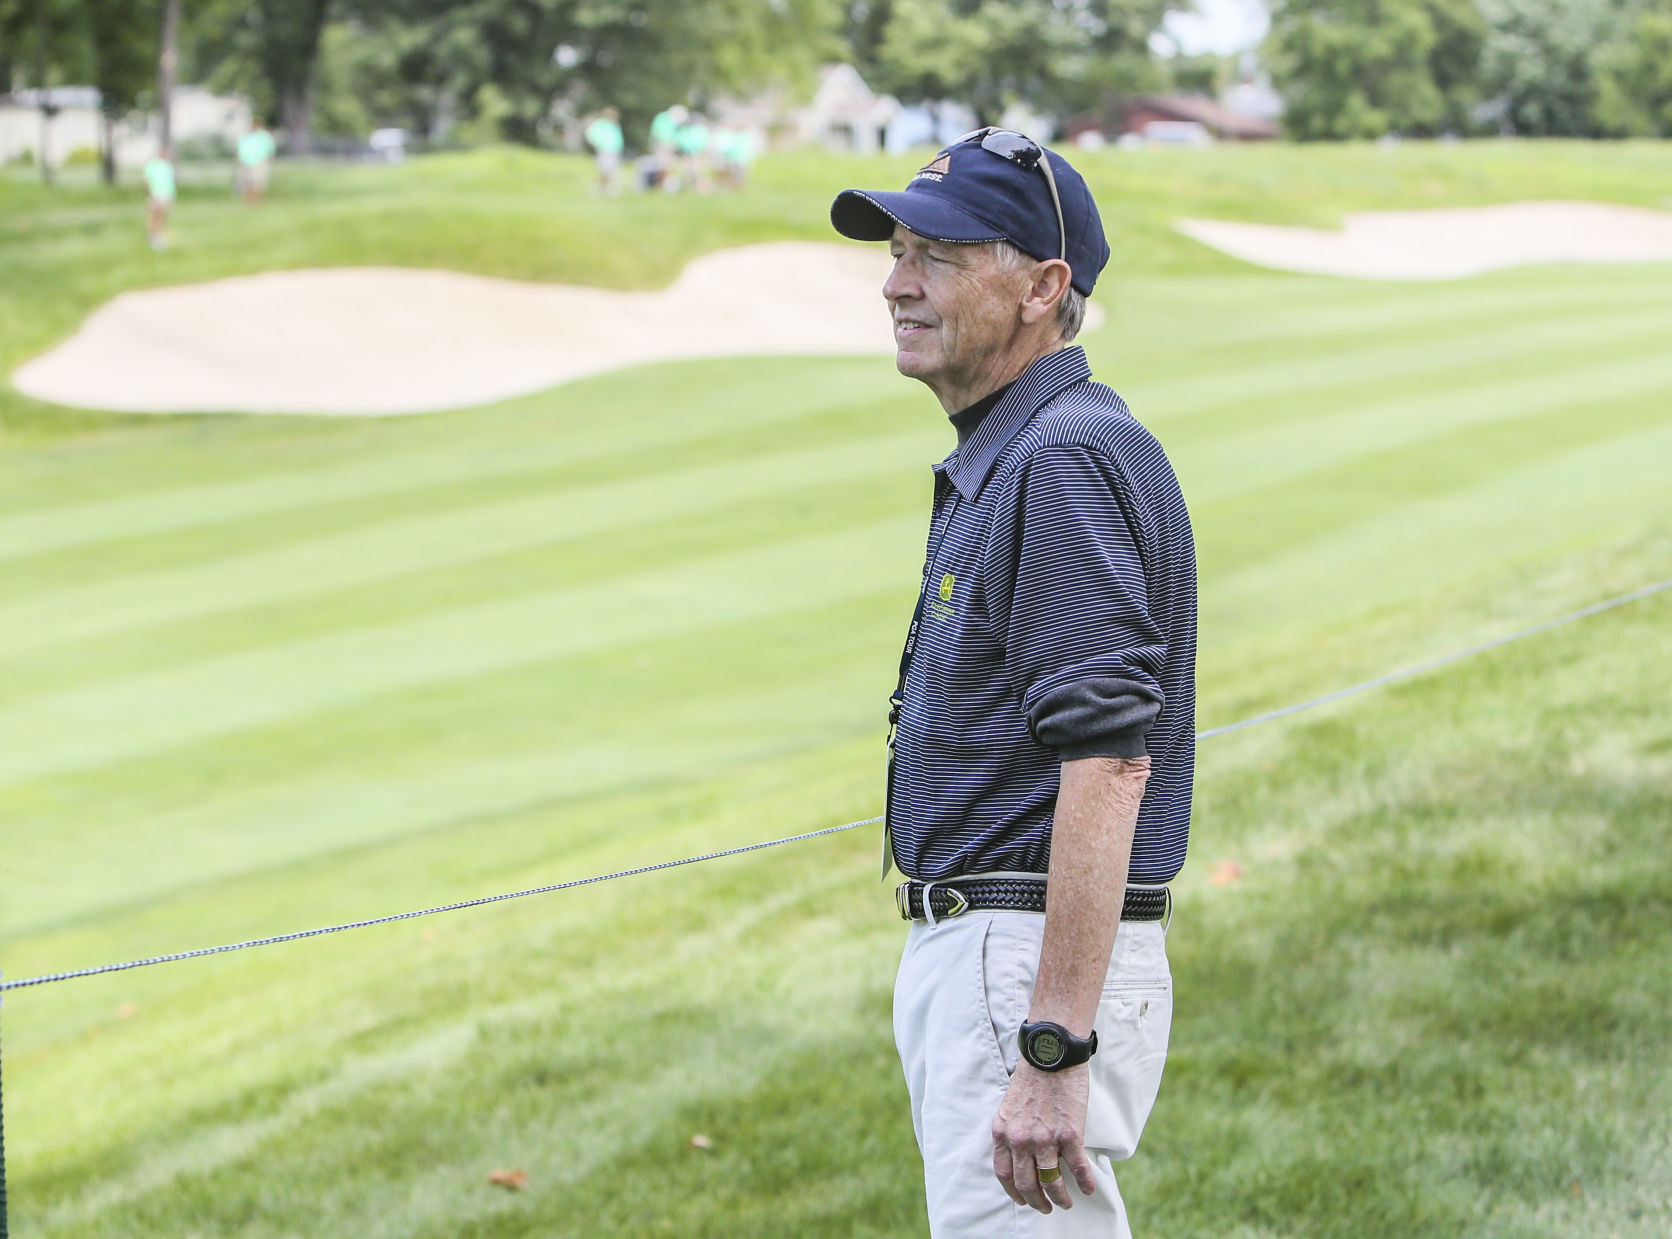 John Deere Classic TV coverage: How to stream or watch Keith Mitchell